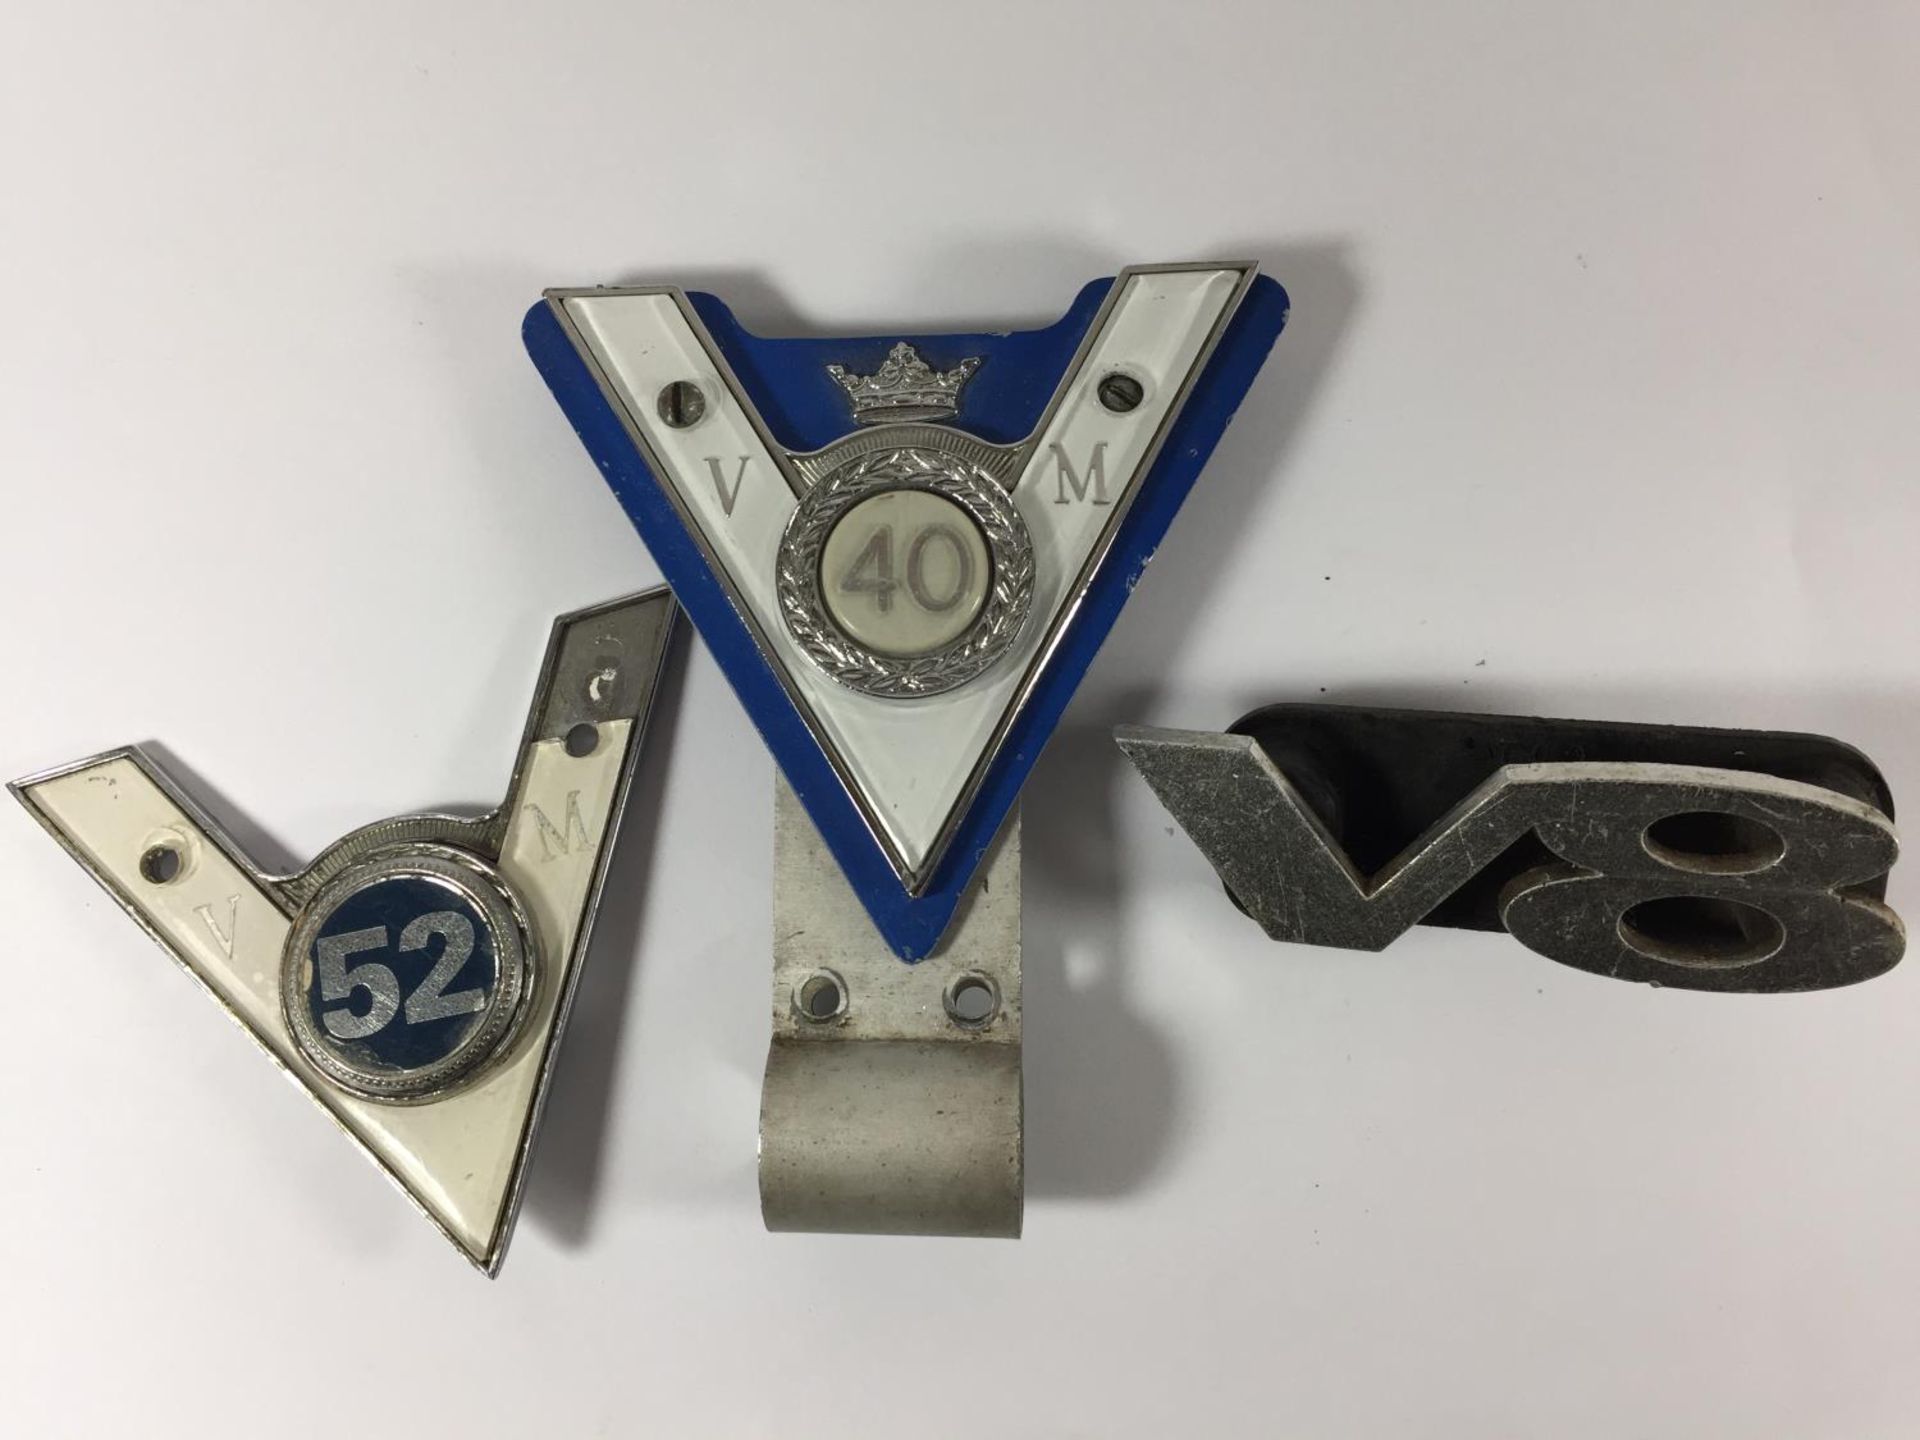 TWO VINTAGE VETERAN MOTOR CLUB BADGES 40 YEARS AND 52 YEARS AND A V8 LOGO